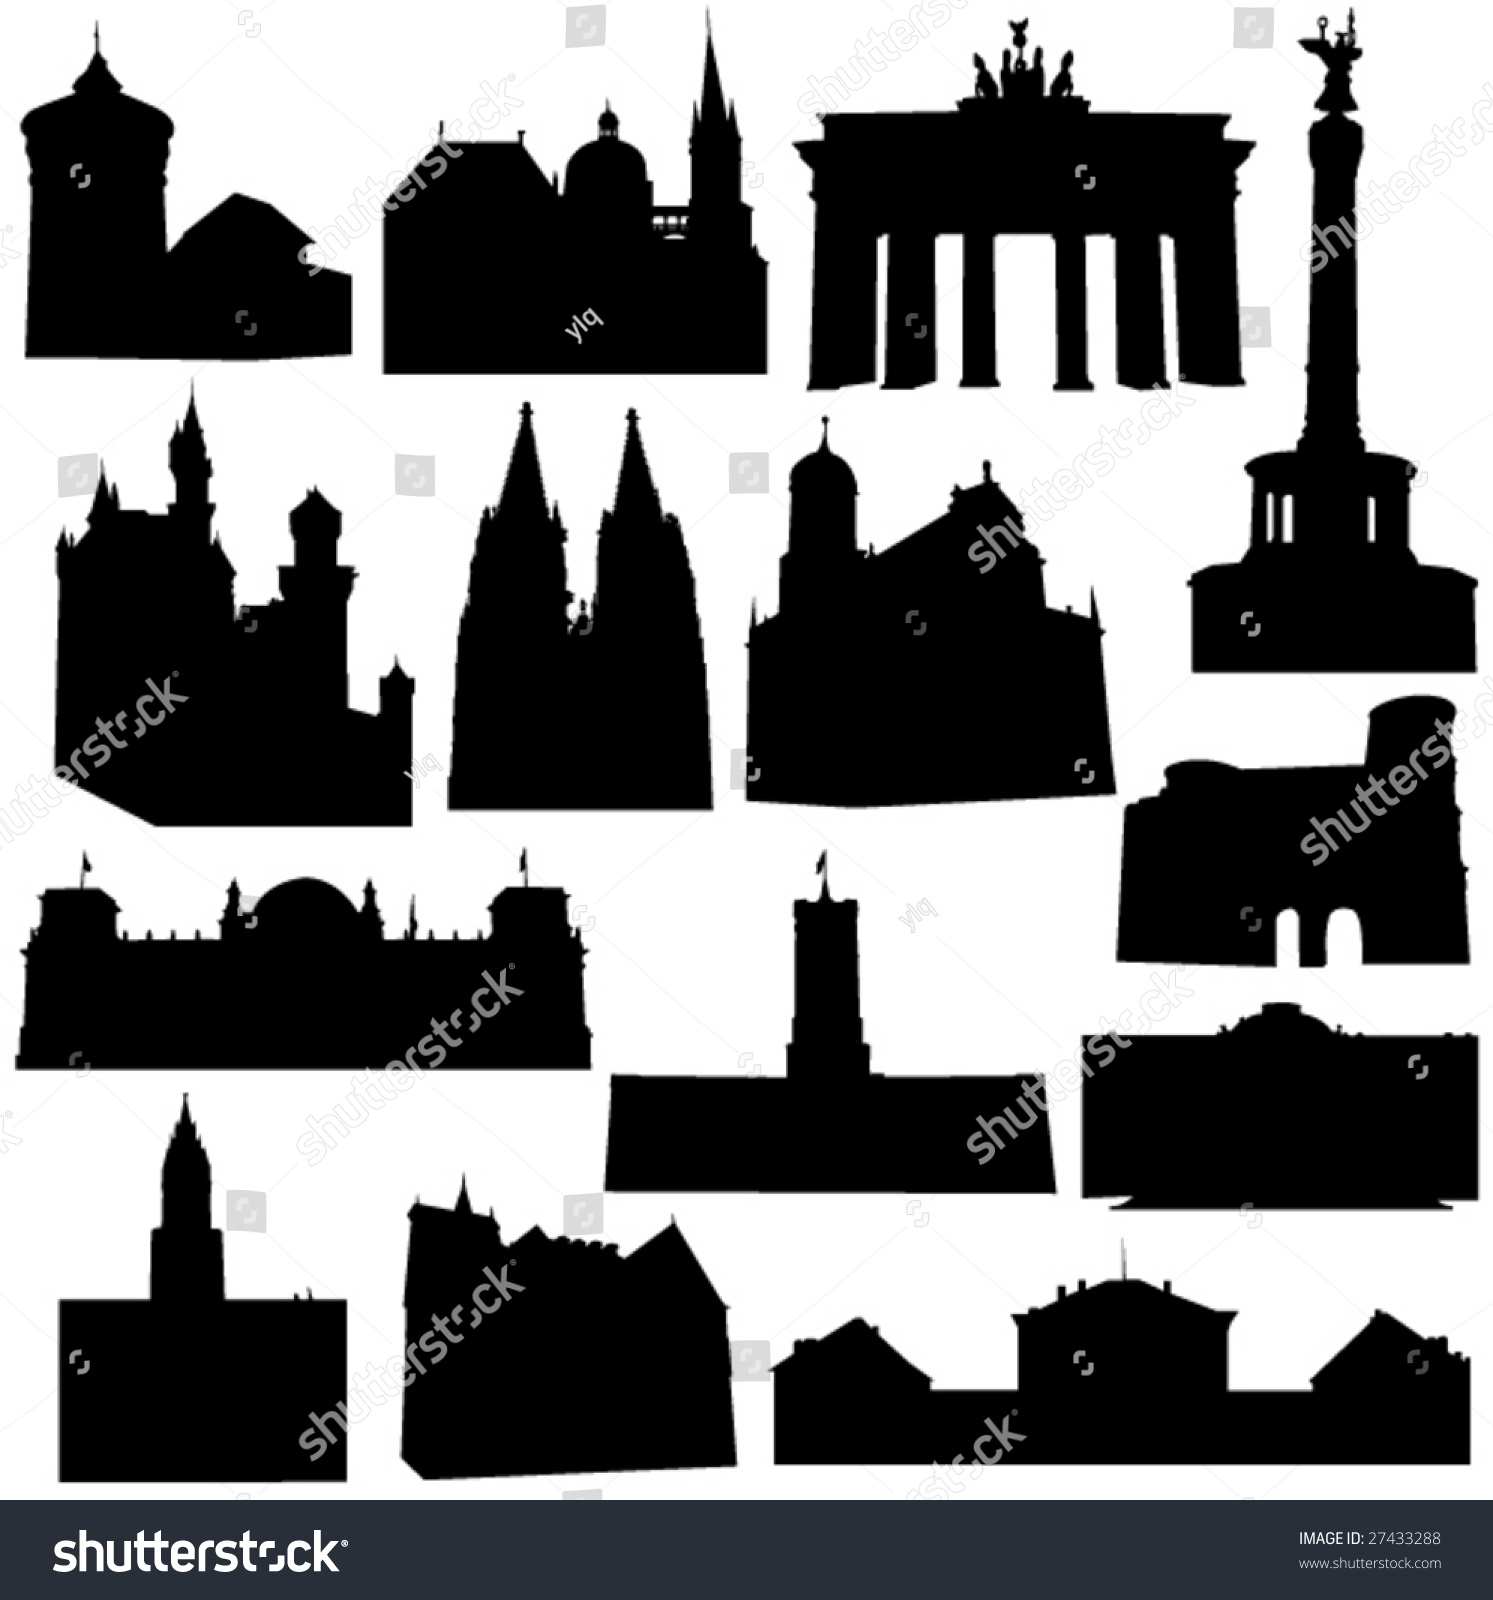 SVG of Well-known Germany architecture svg